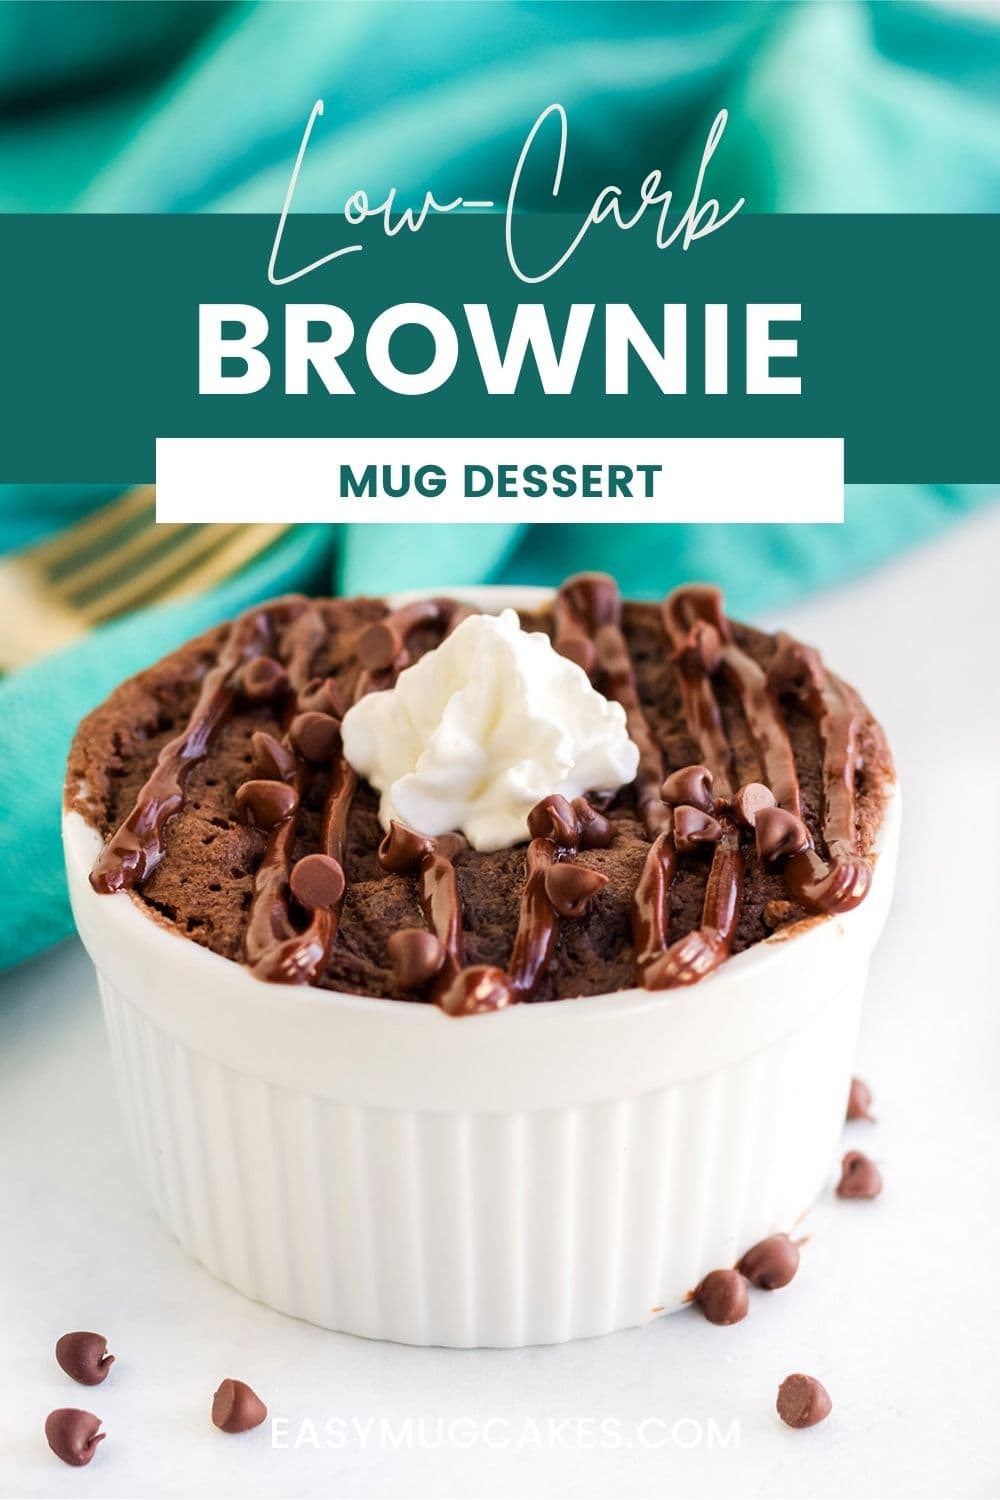 Brownie in a mug with whipped cream and chocolate chips.